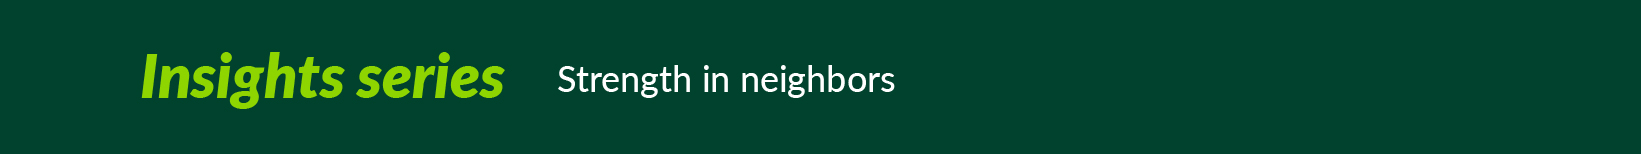 Insights series #2: Strength in neighbors